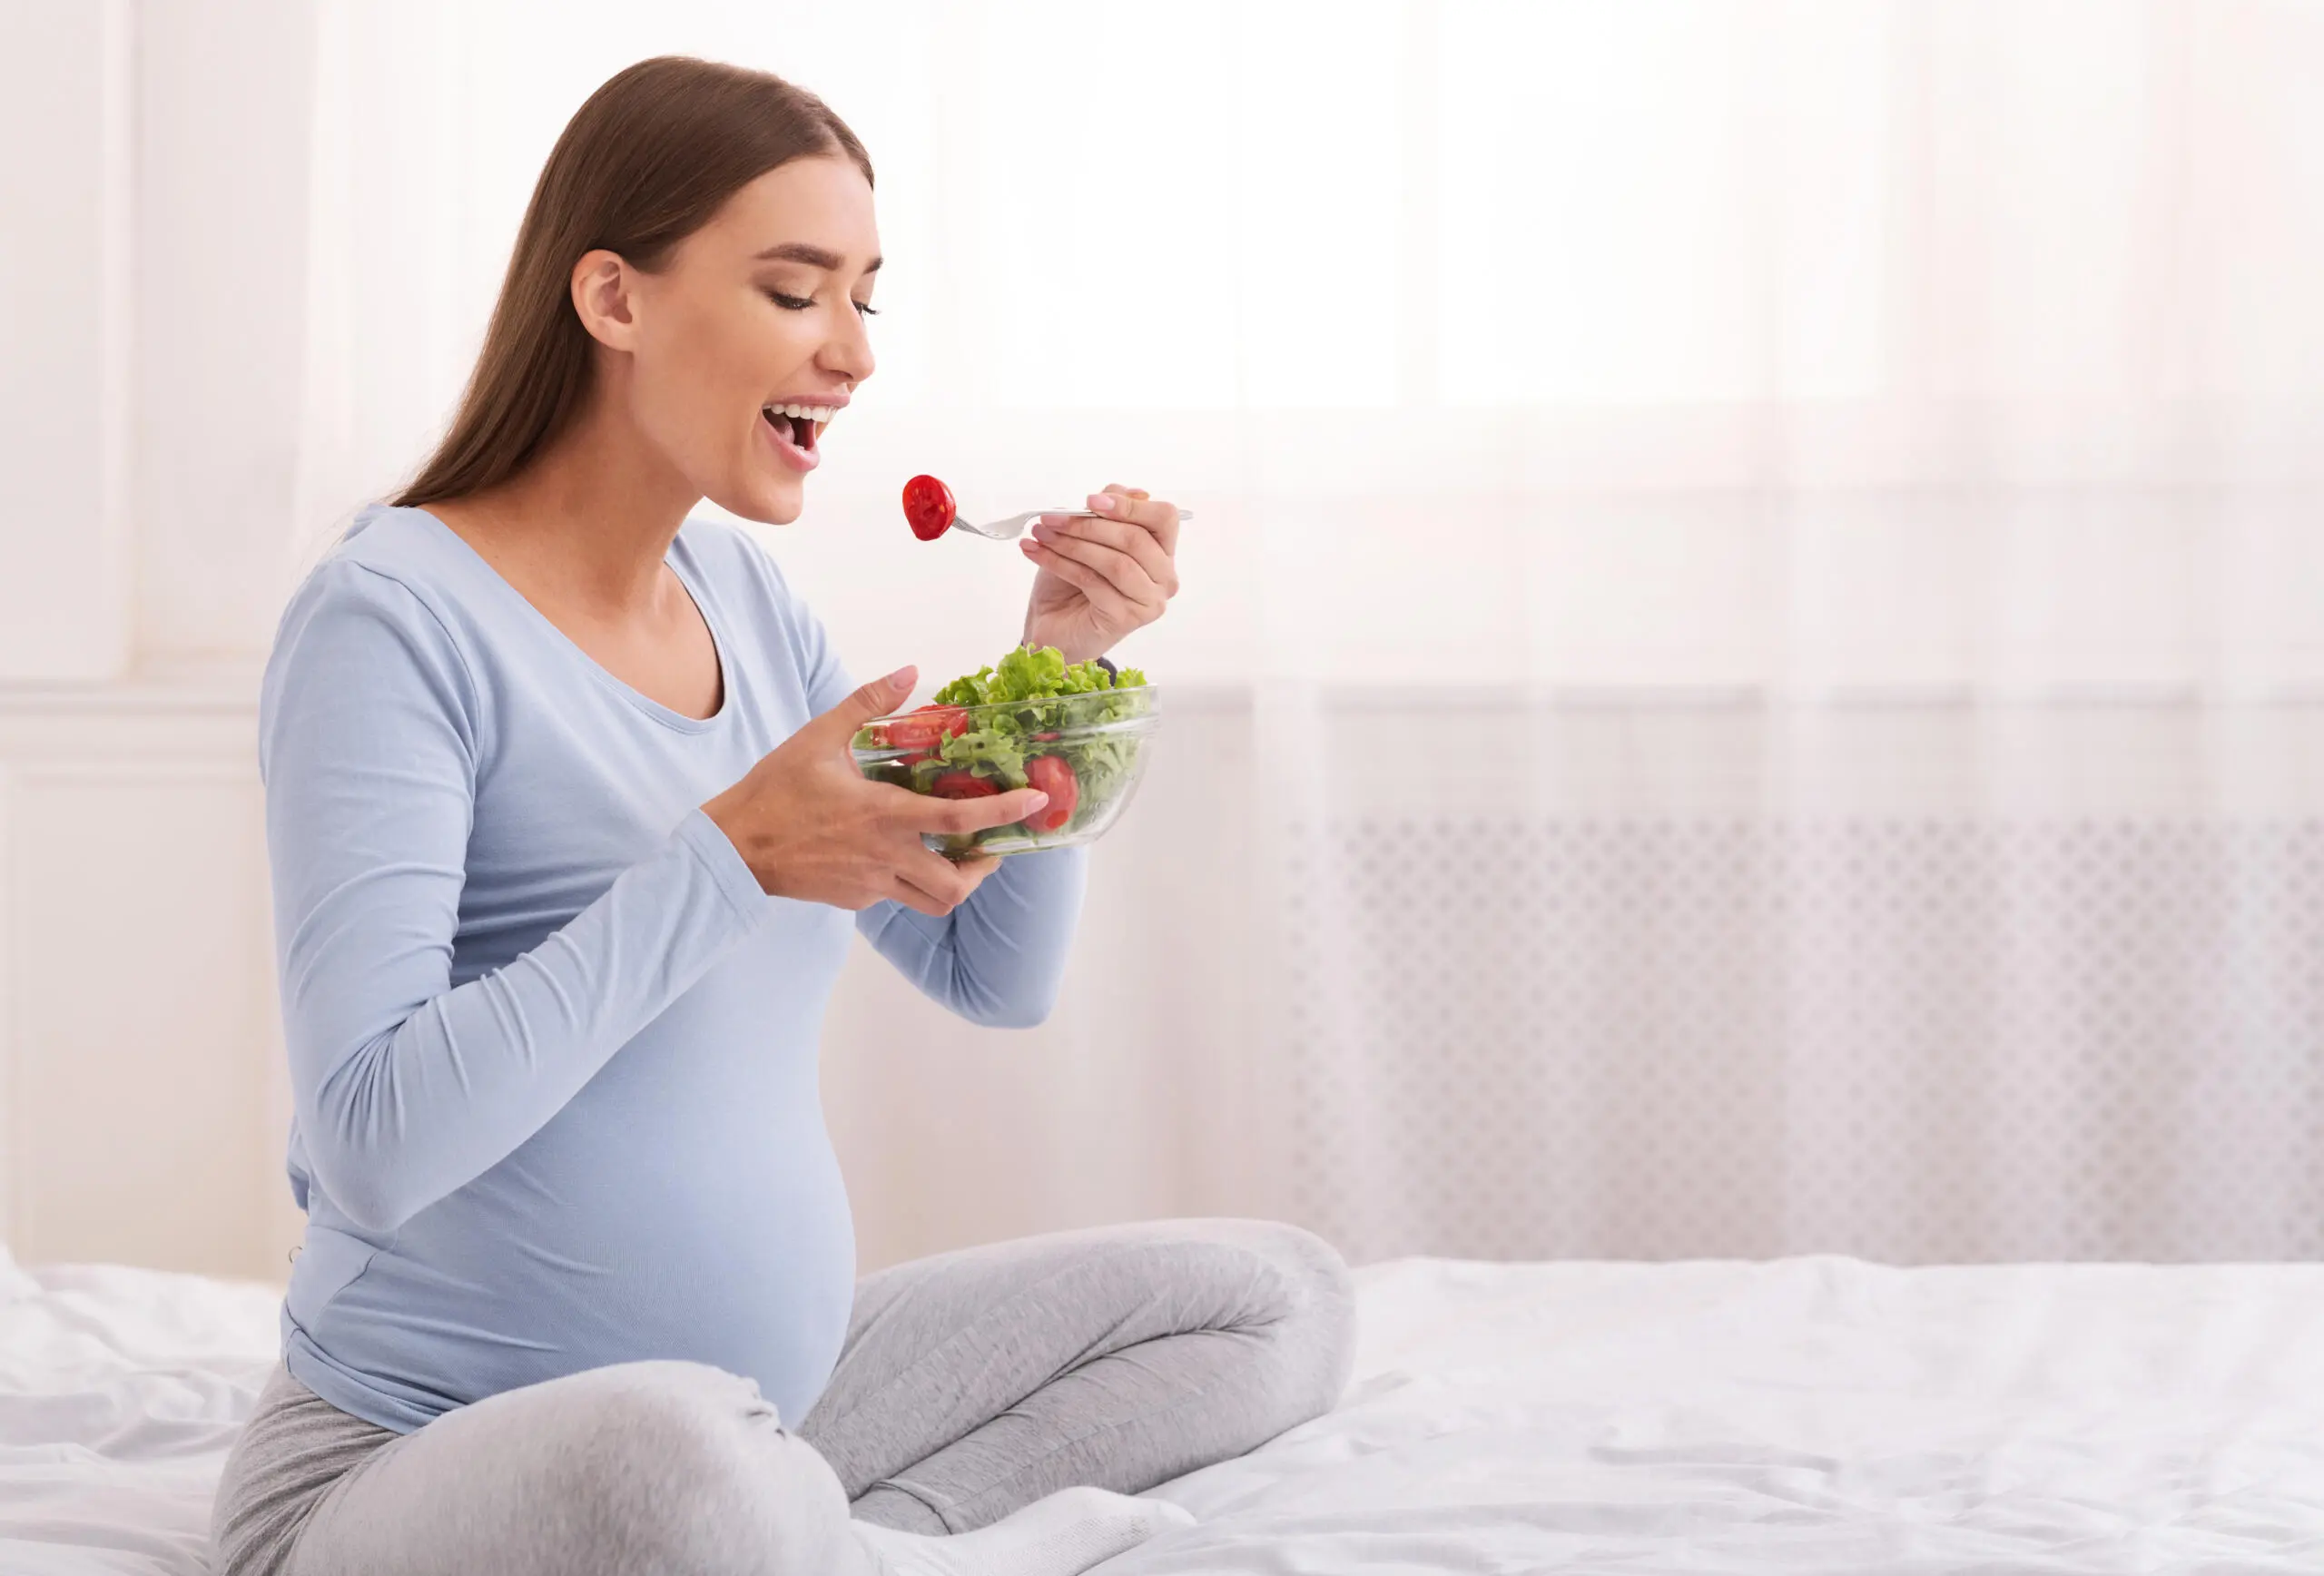 The Significance Of Healthy Eating During A High-Risk Pregnancy